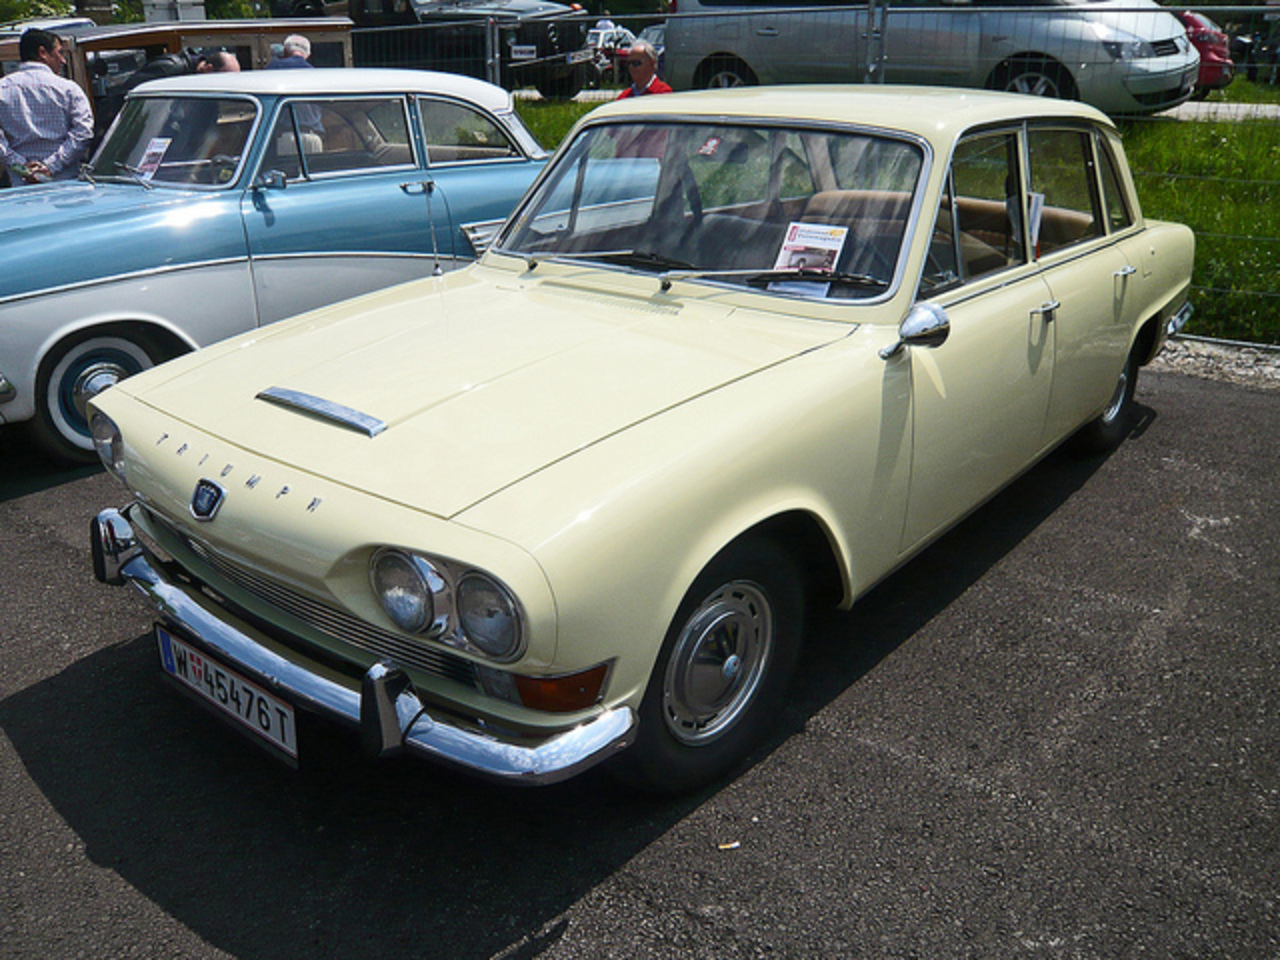 Flickr: The Triumph Saloon Cars Pool